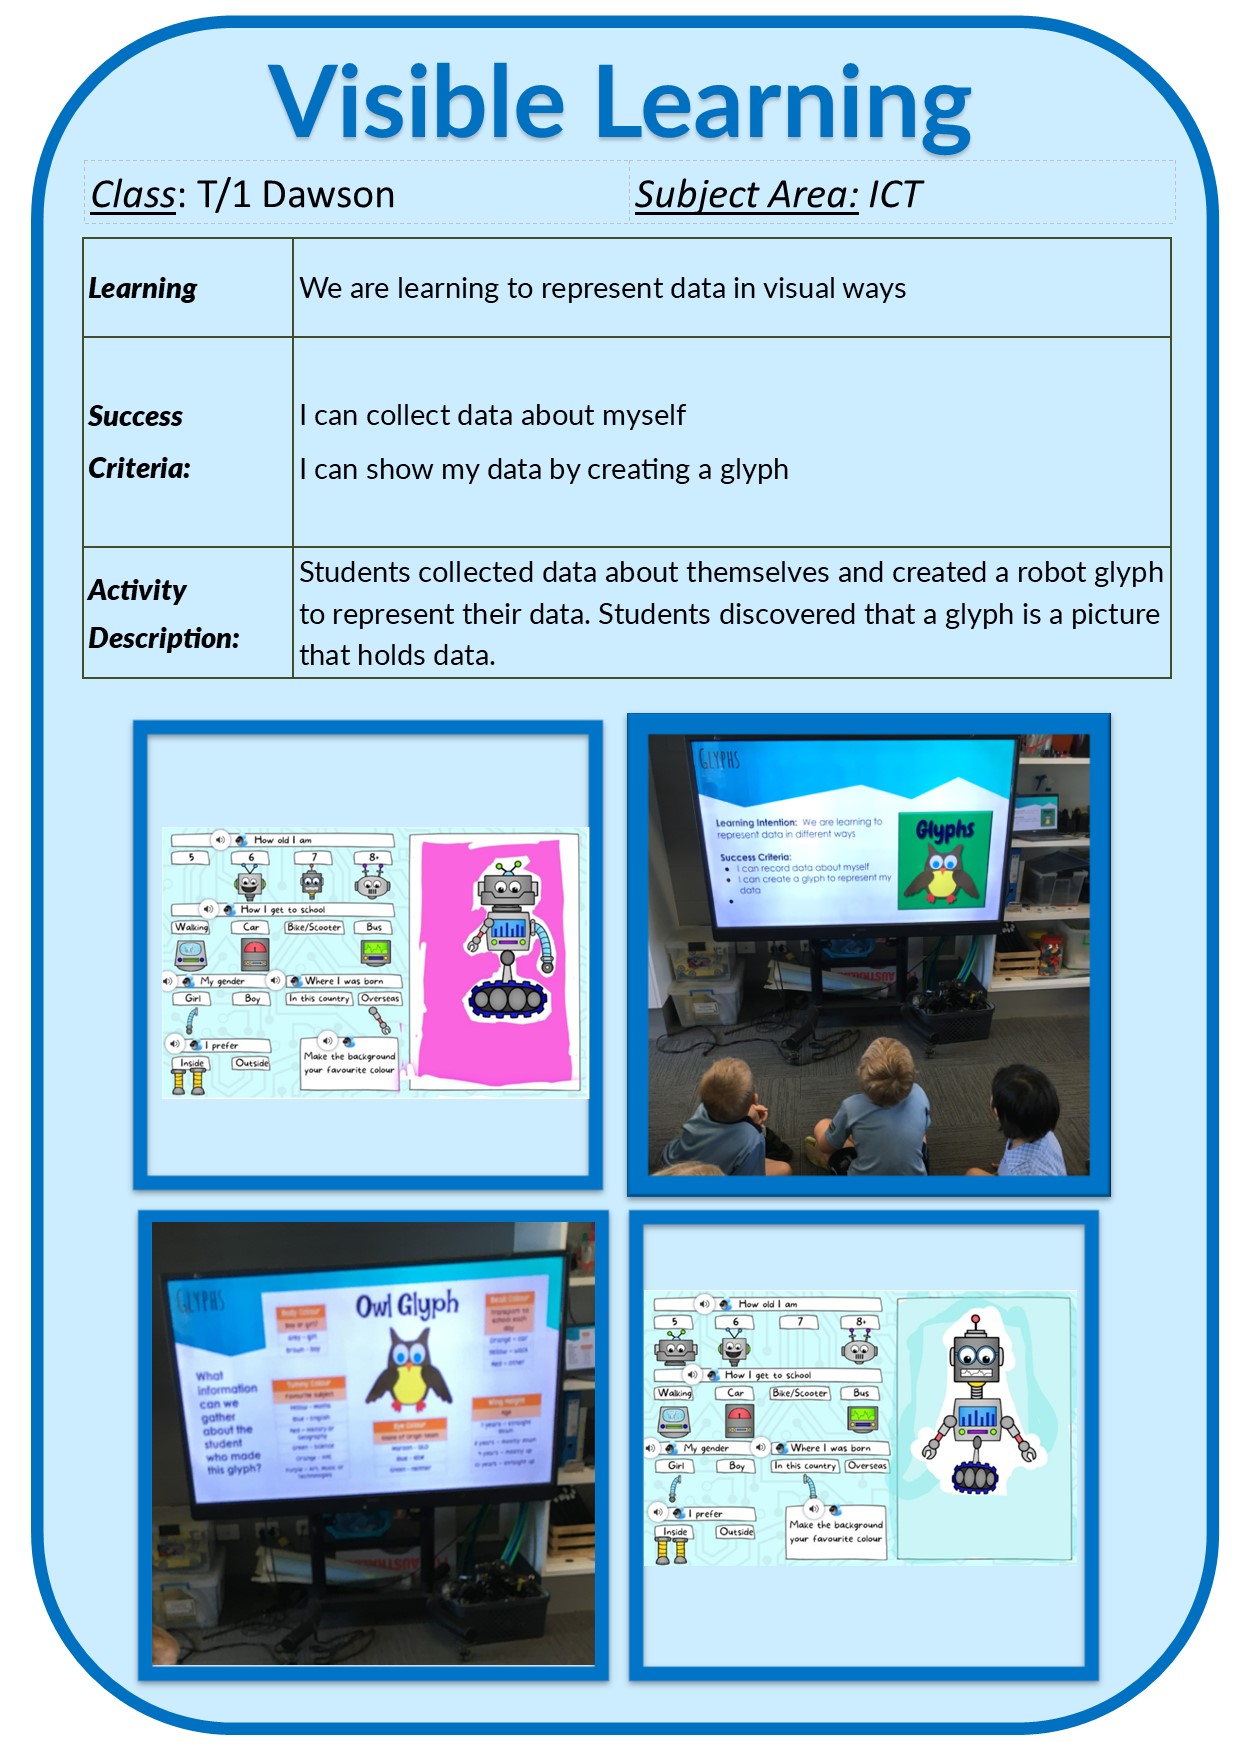 Visible Learning/VL ICT-Term 4 Week 3-4.jpg